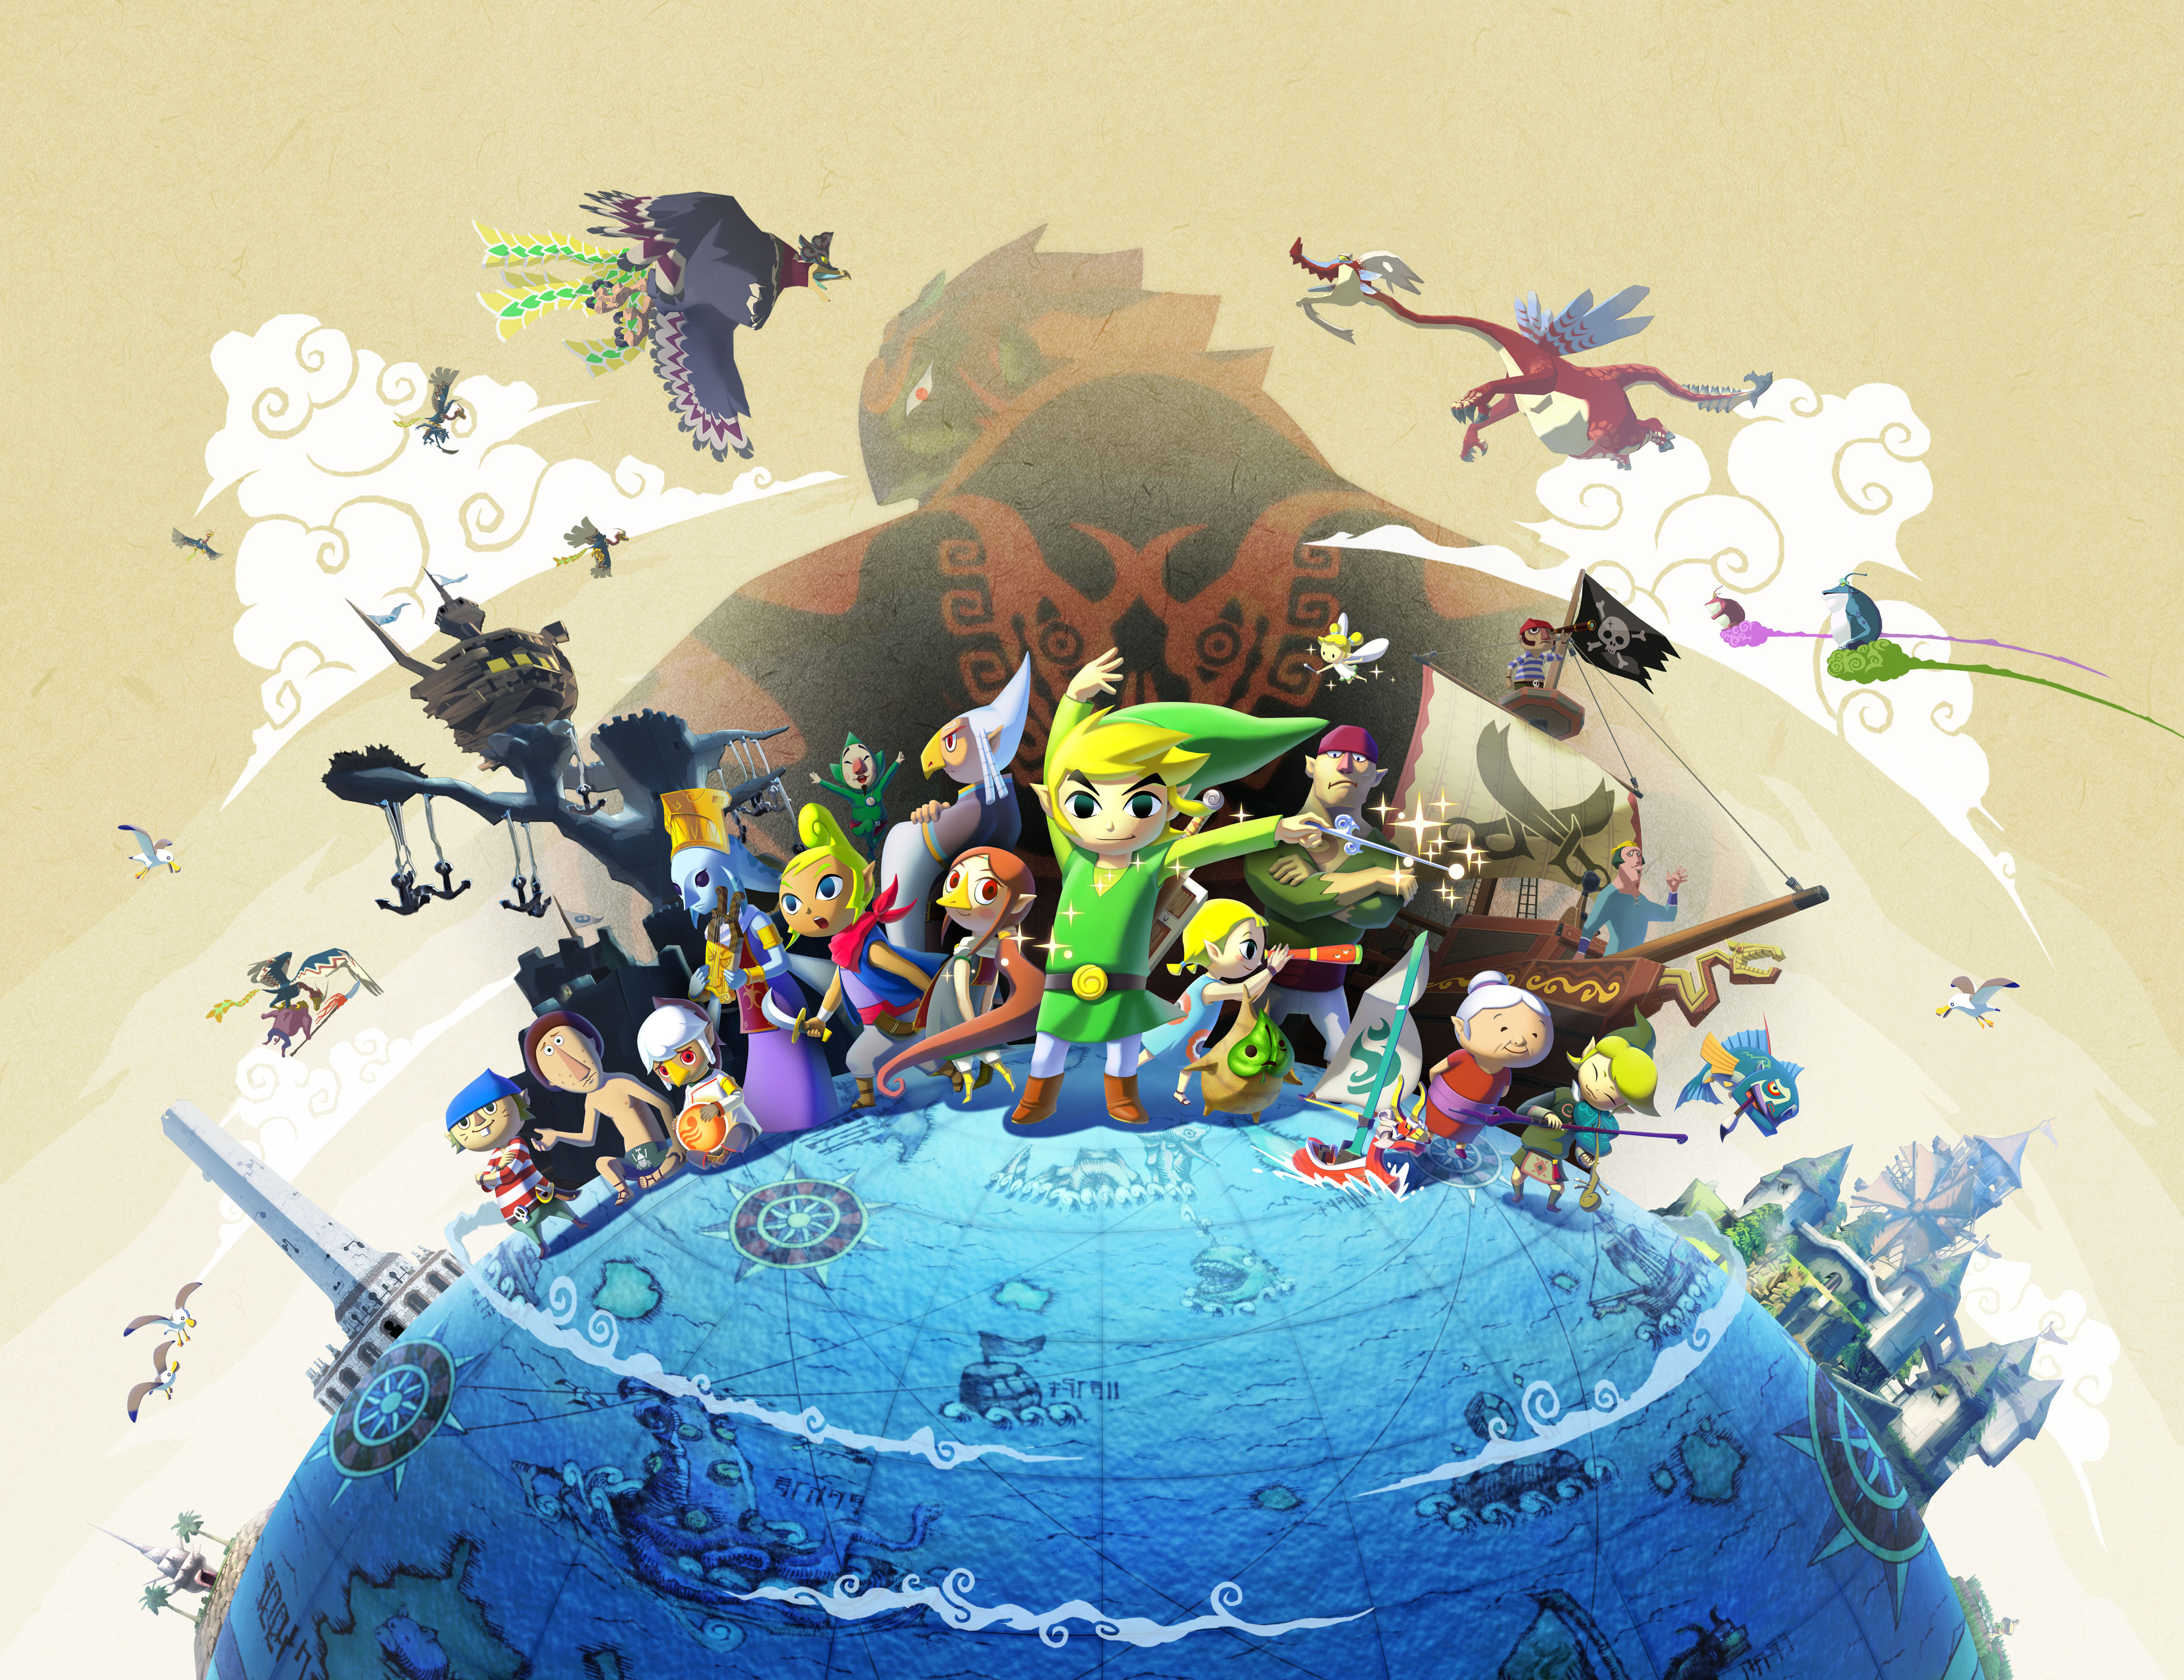 Video Game The Legend of Zelda: The Wind Waker HD HD Wallpaper | Background Image